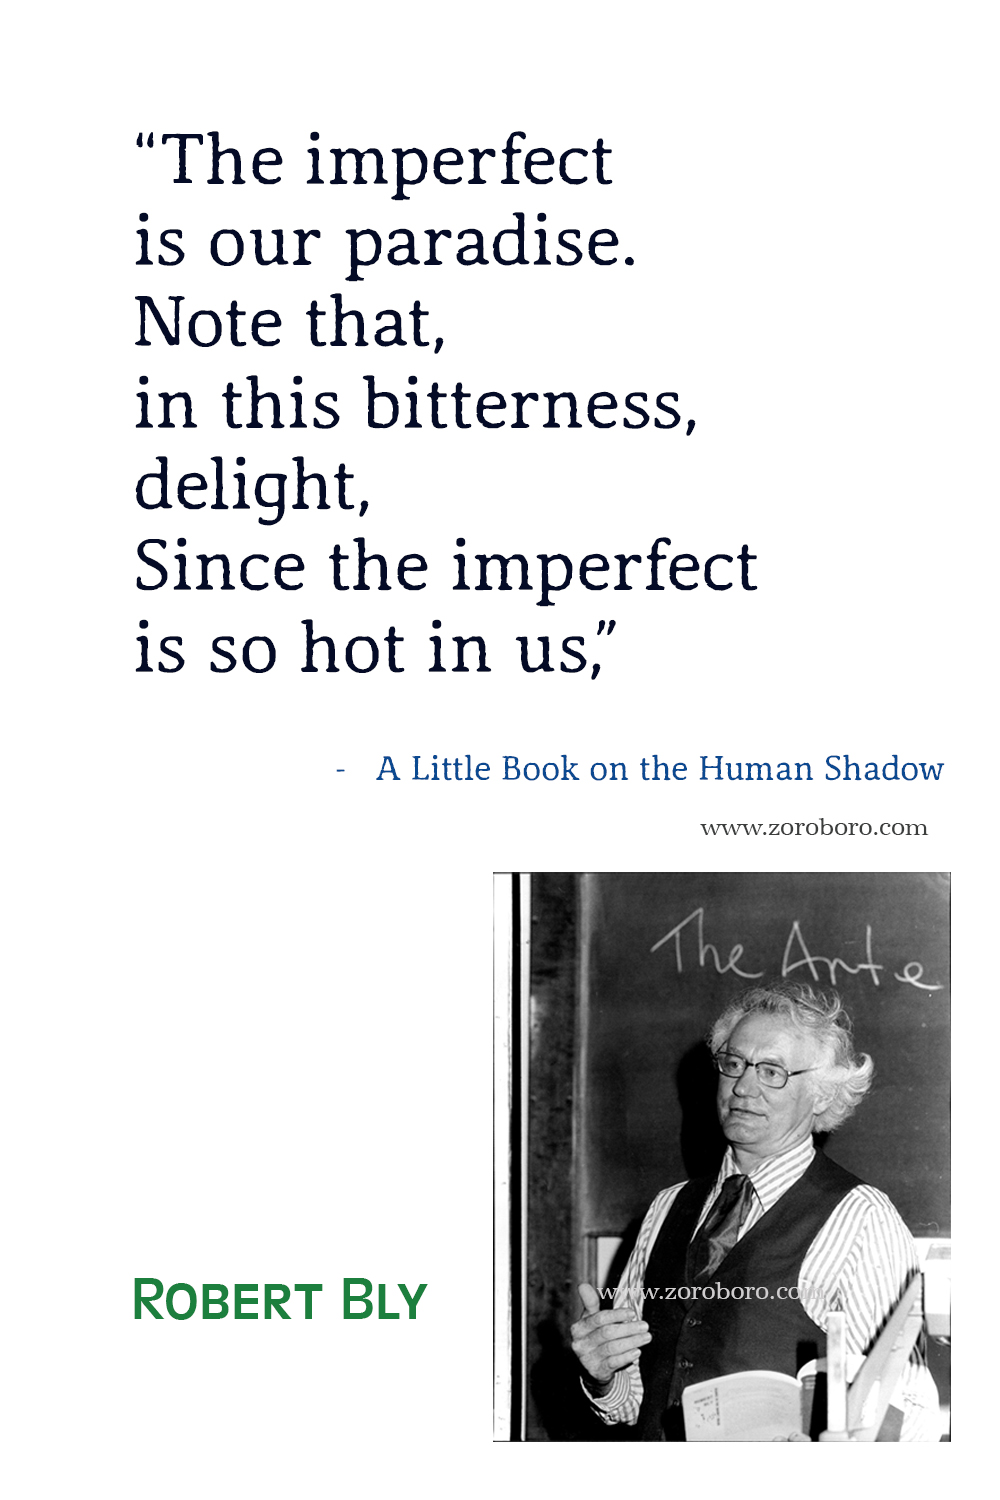 Robert Bly Quotes, Robert Bly Poems, Robert Bly Poetry, Robert Bly Books Quotes, Robert Bly Iron John Quotes, Robert Bly Young .